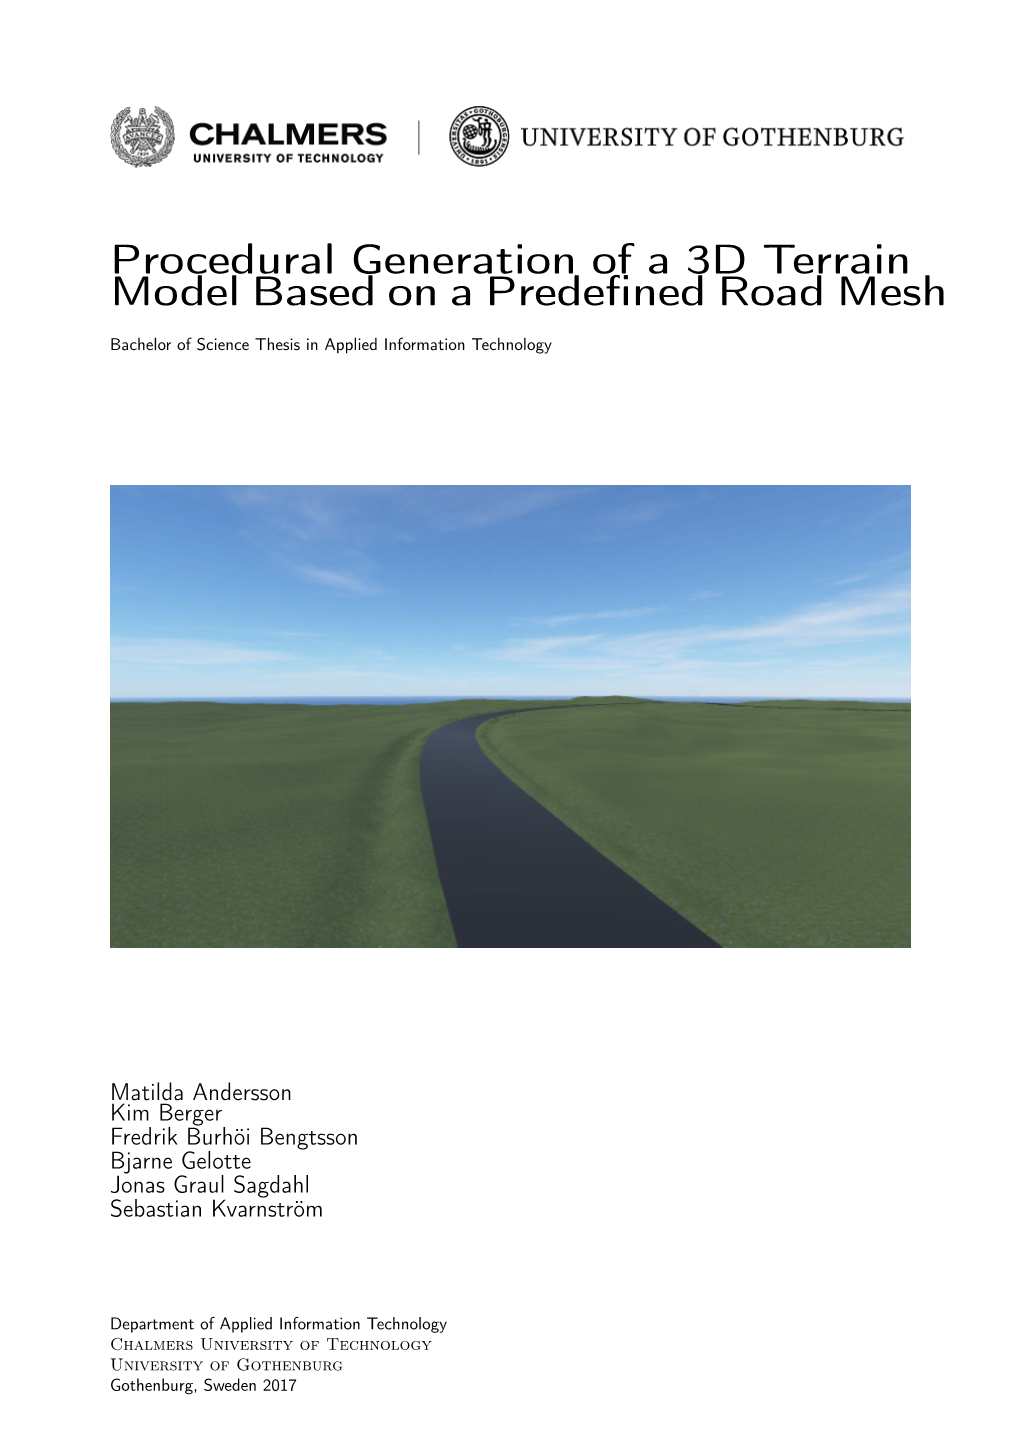 Procedural Generation of a 3D Terrain Model Based on a Predefined